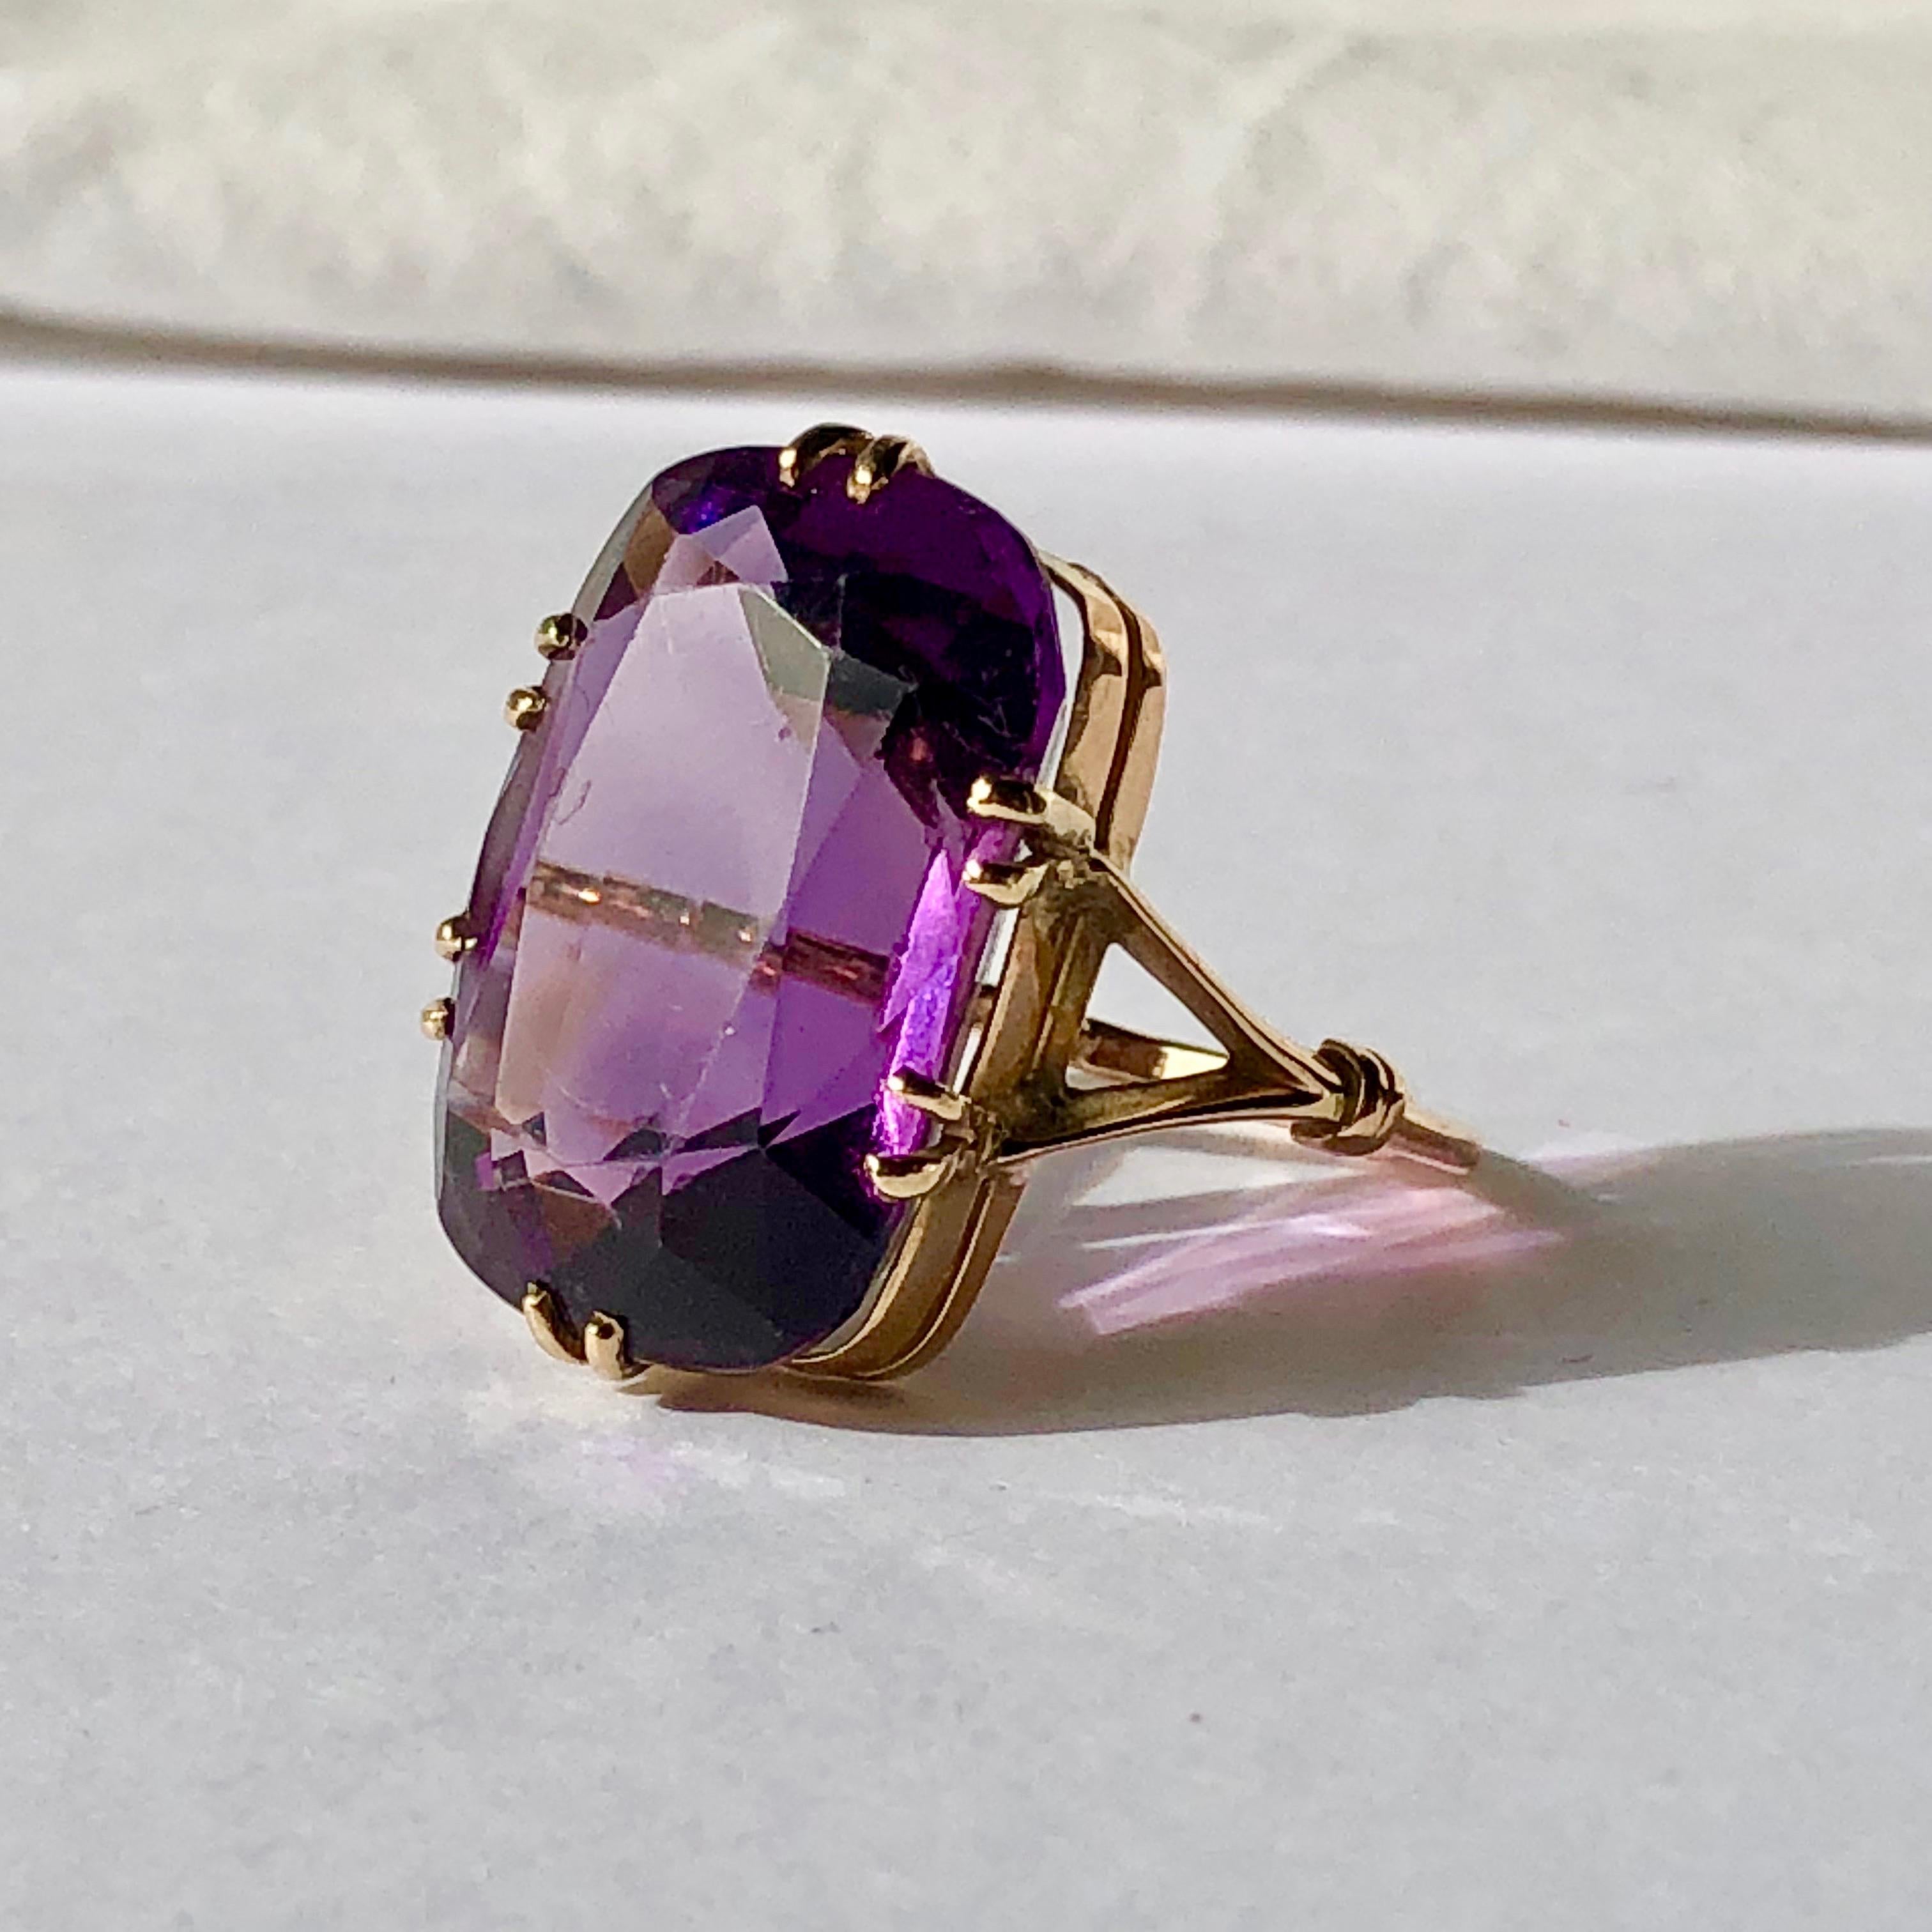 A fabulous large amethyst ring on yellow gold

Set with 6 attractive double claws which not only keep the stone safe and secure but are a real design feature

The Bifurcated yellow gold shank with design 'bands' to each fork in the shoulder further